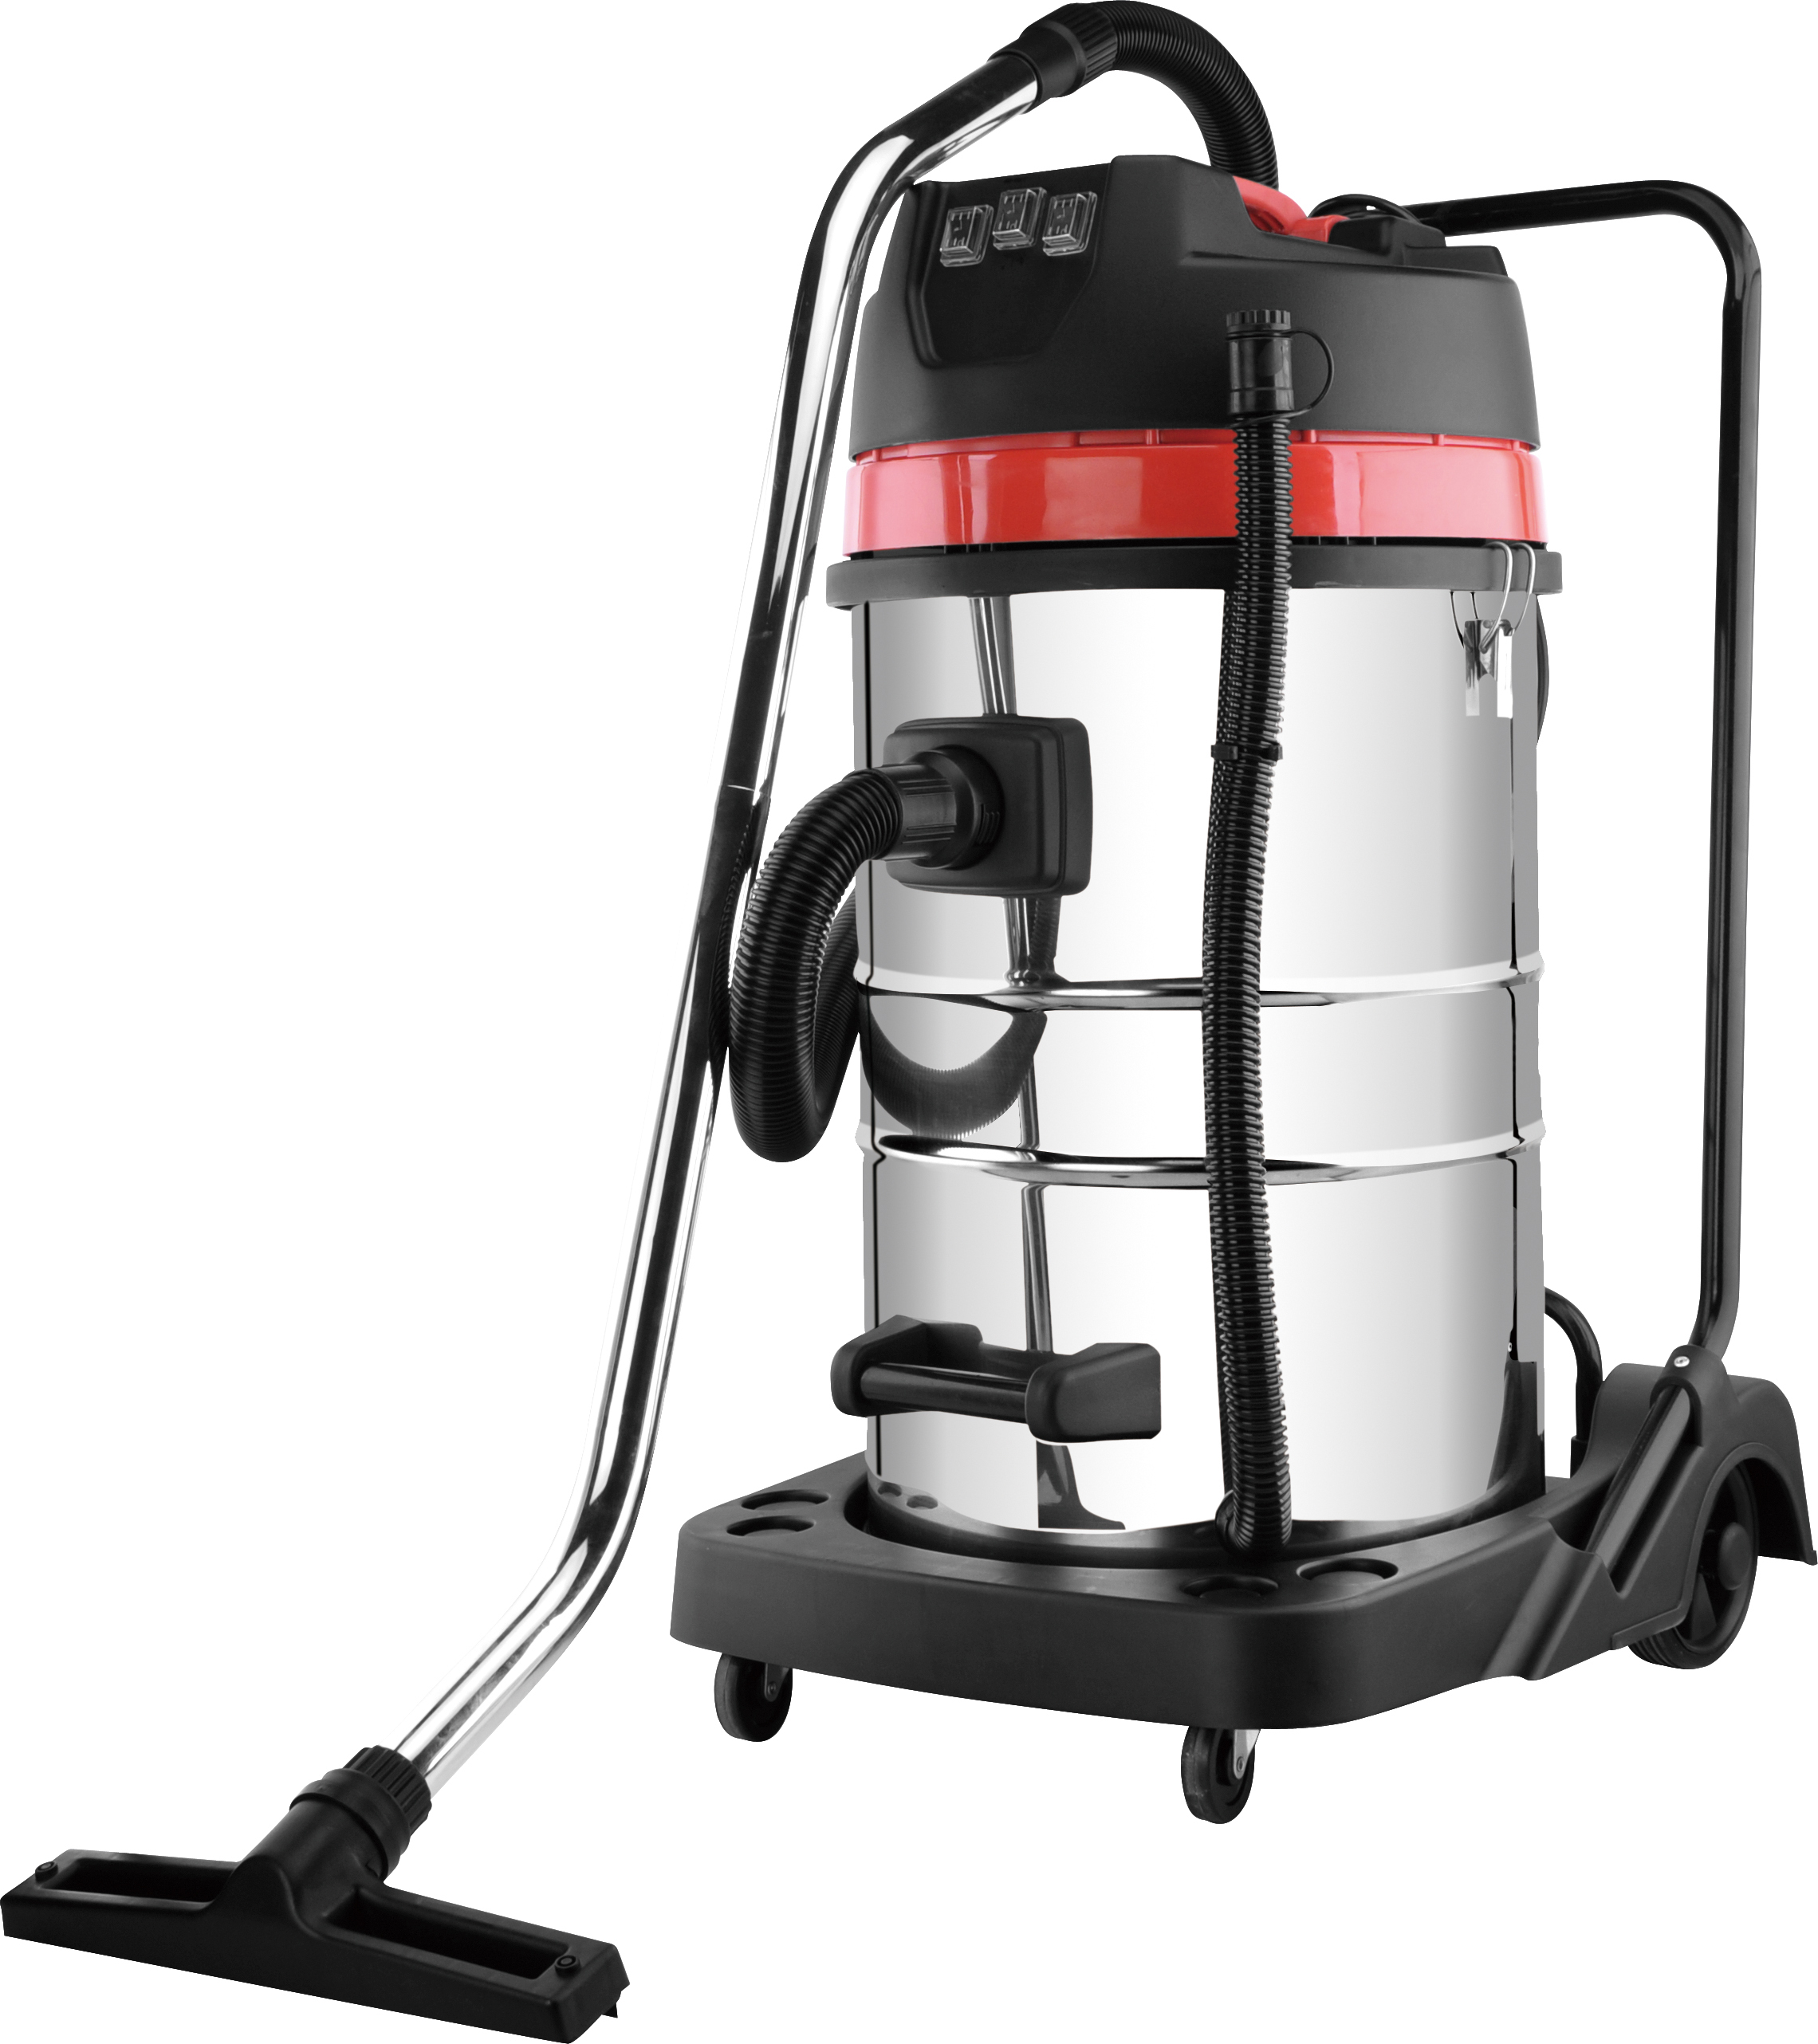 WL70 ce certification professional wet&dry vacuum cleaner